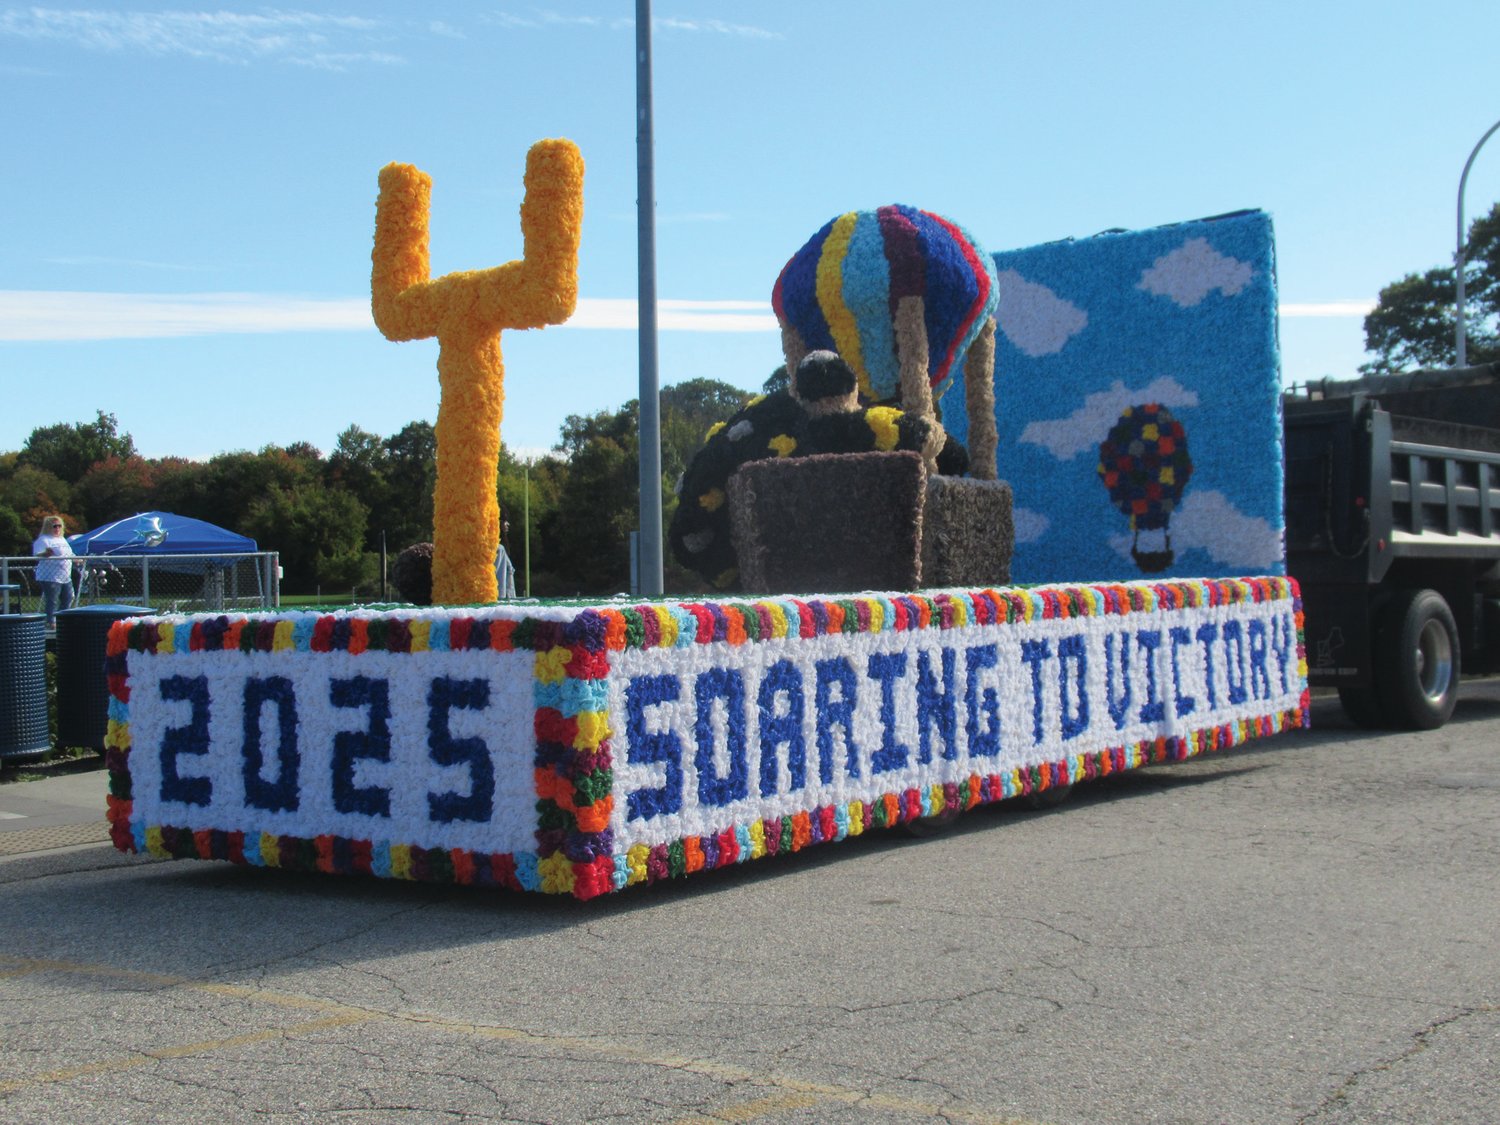 “Soaring to Victory” amid a hot air balloon was the Johnston High Class of 2025’s floats entry.